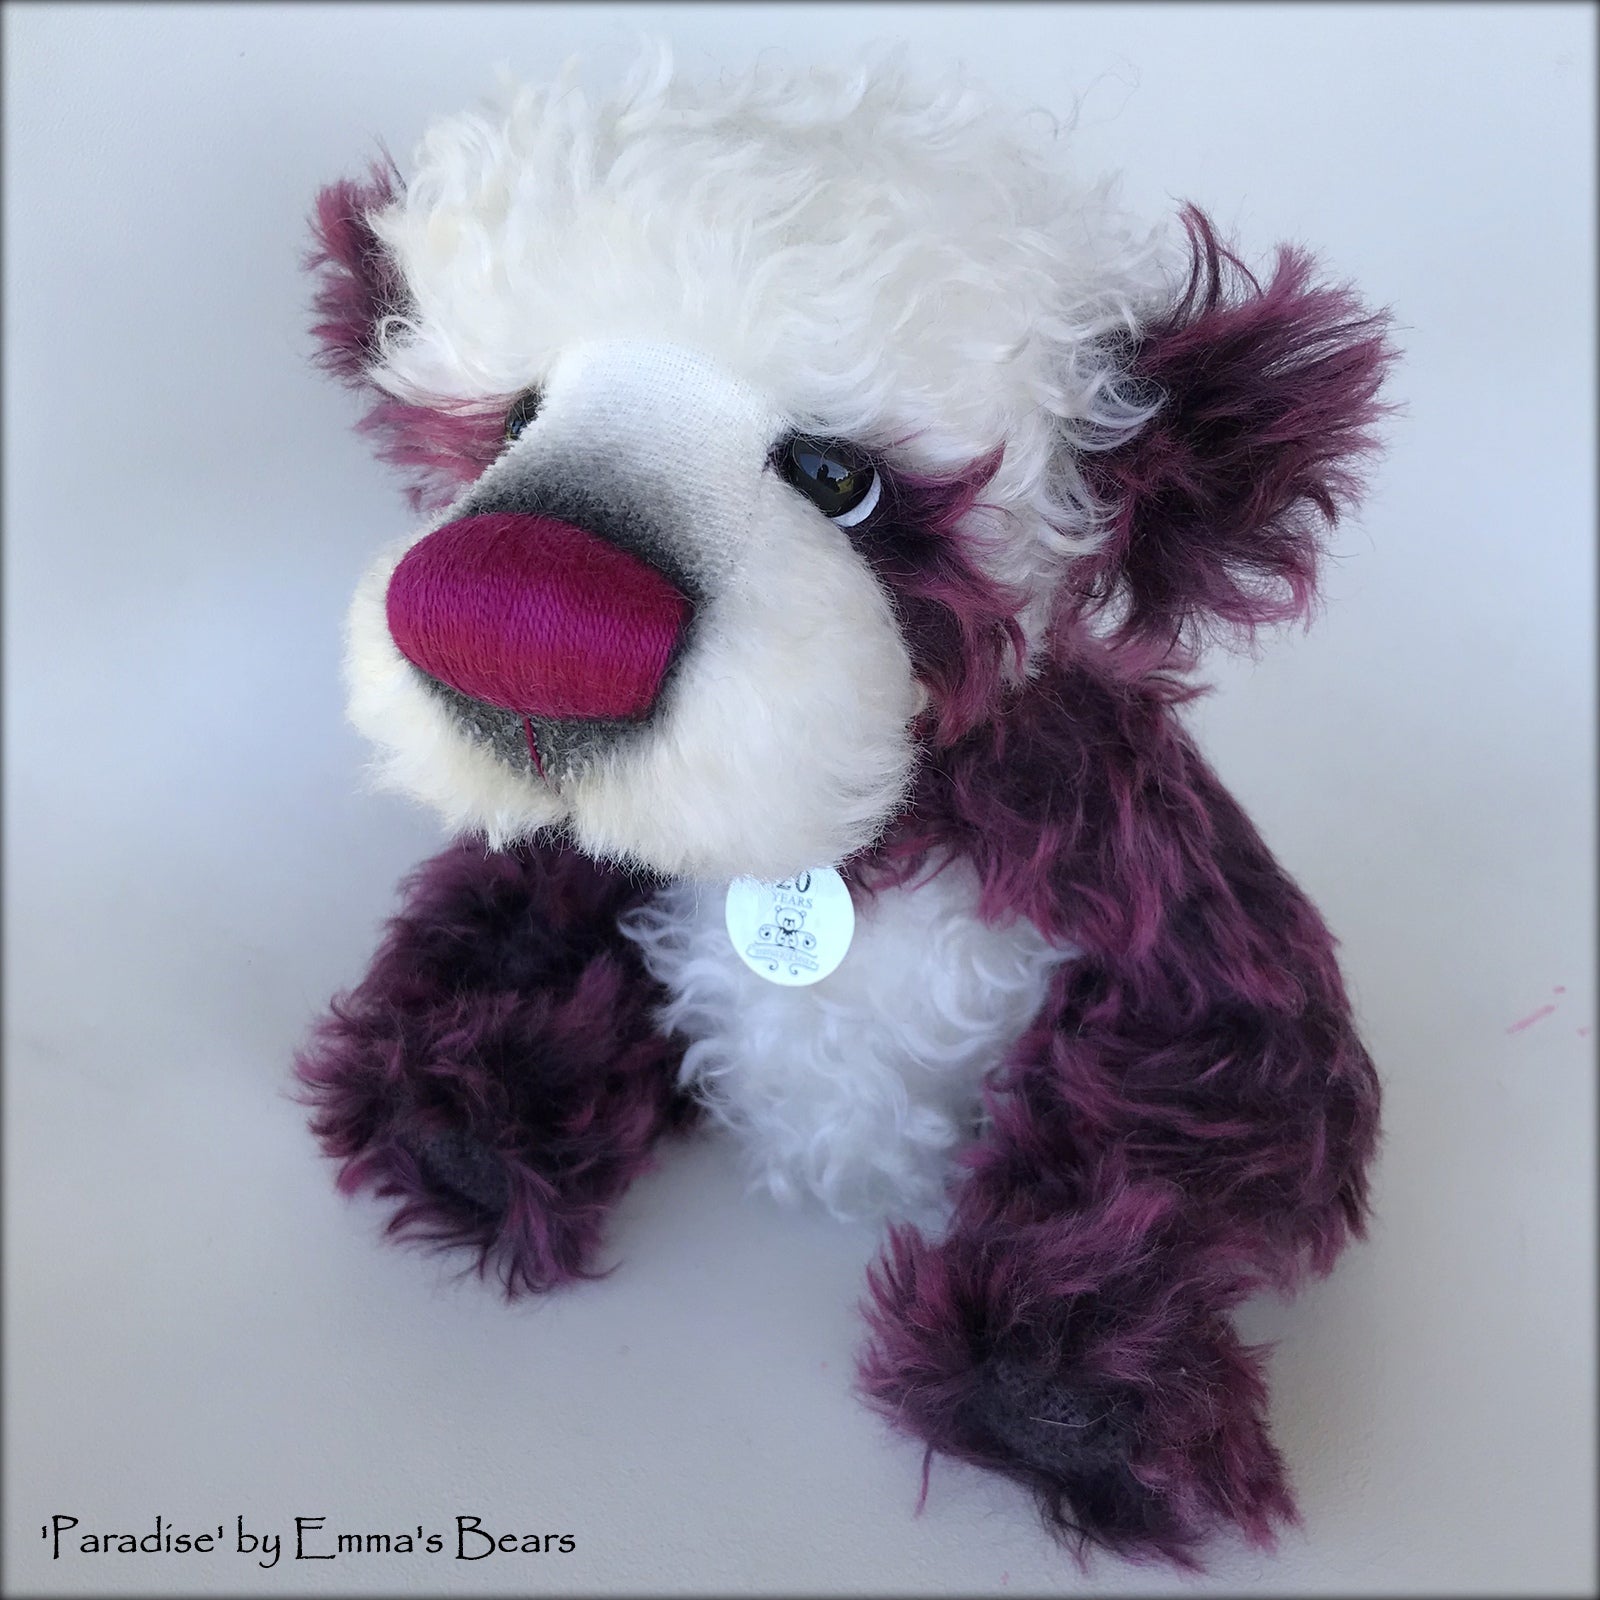 Paradise - 20 Years of Emma's Bears Commemorative Teddy - OOAK in a series